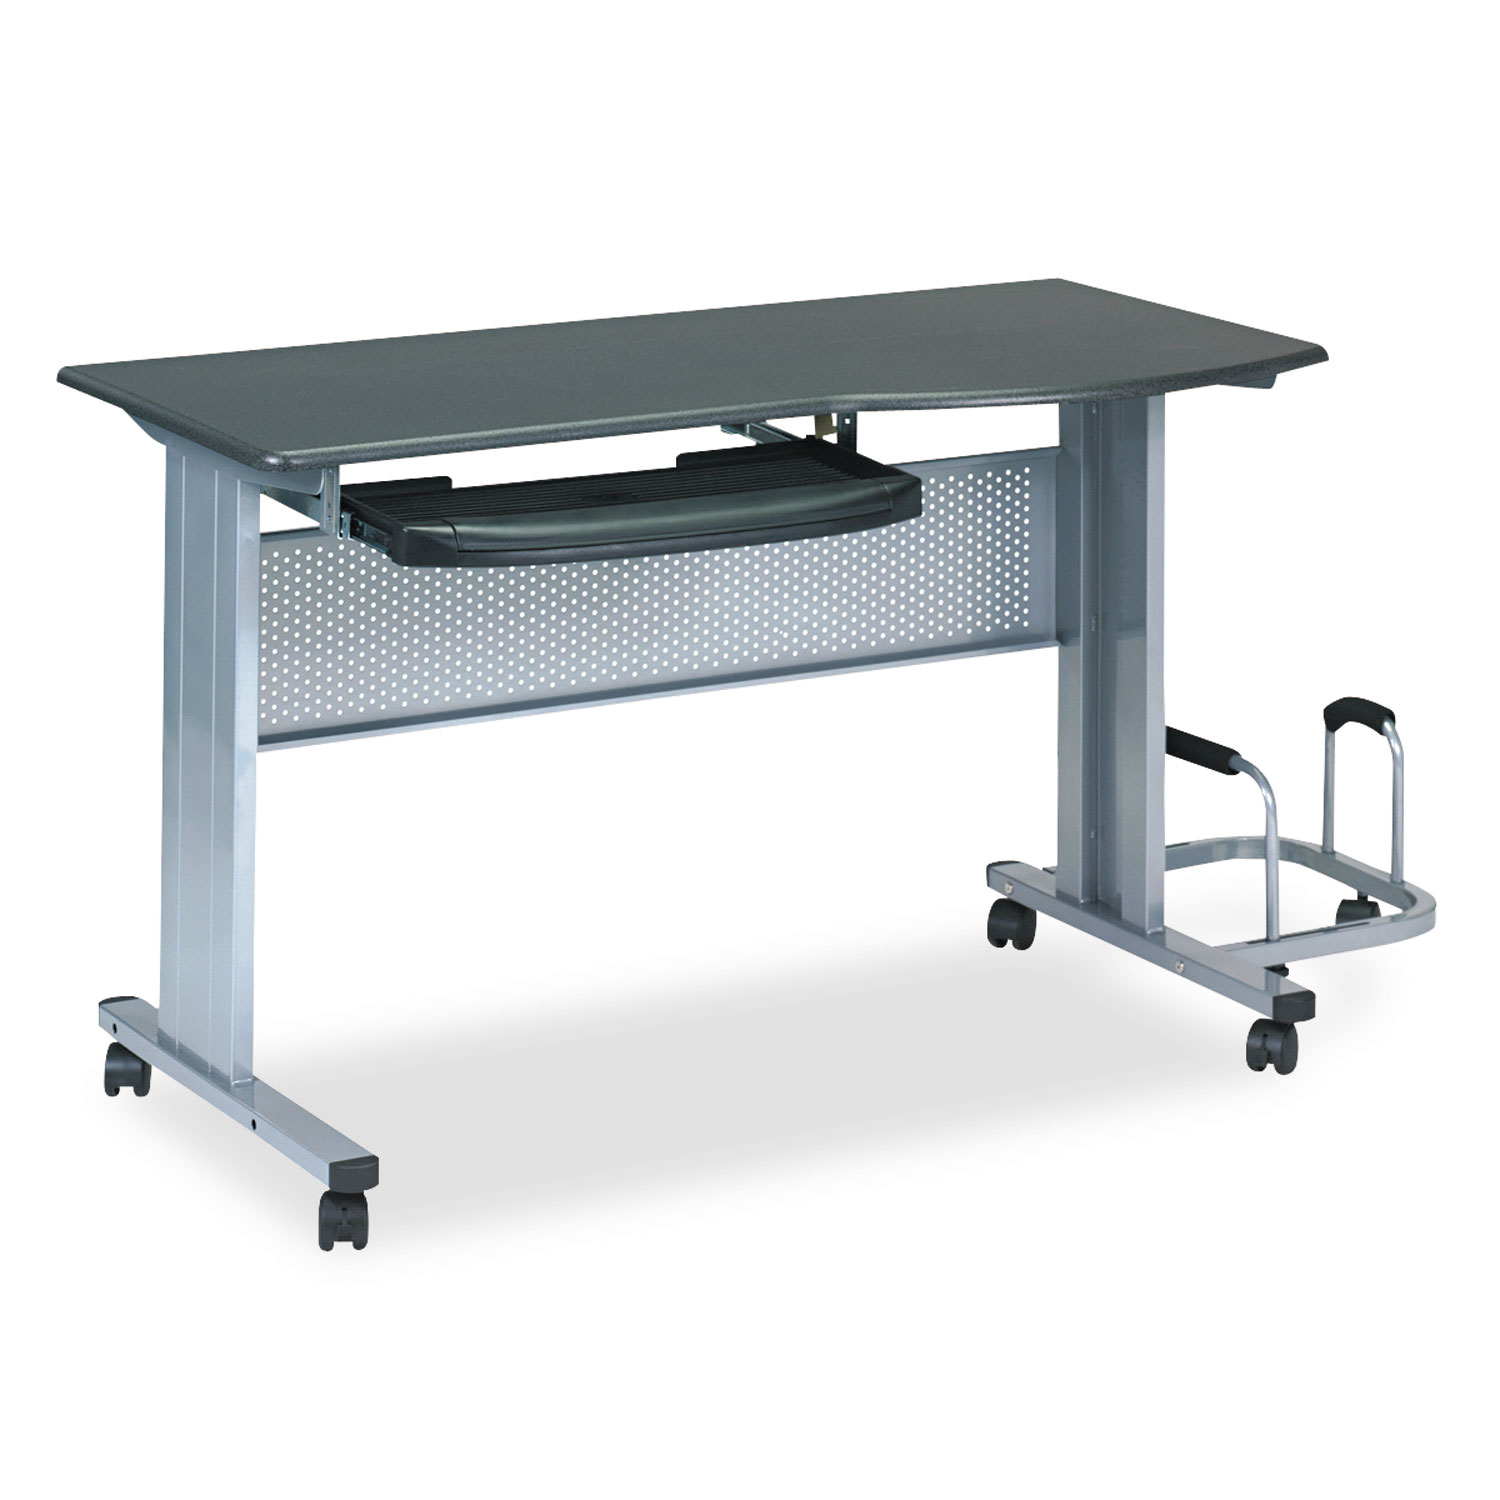 Eastwinds Mobile Work Table, 57w x 23-1/2d x 29h, Anthracite